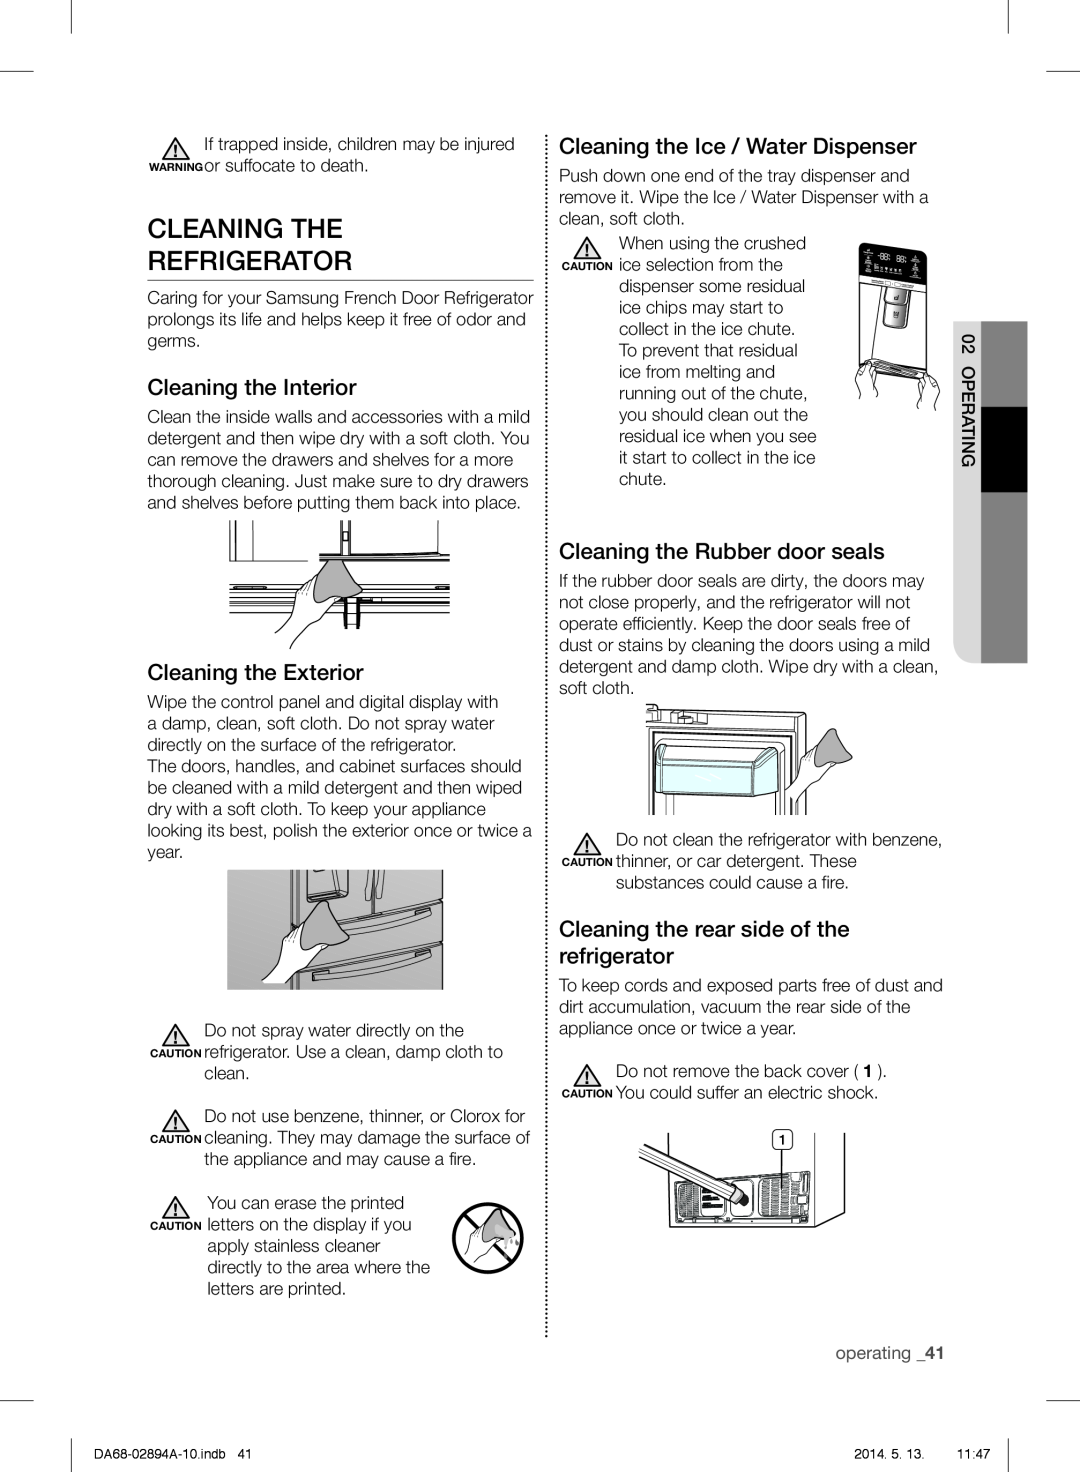 Samsung RF31FMESBSR user manual Cleaning The Refrigerator, Cleaning the Interior, Cleaning the Exterior 